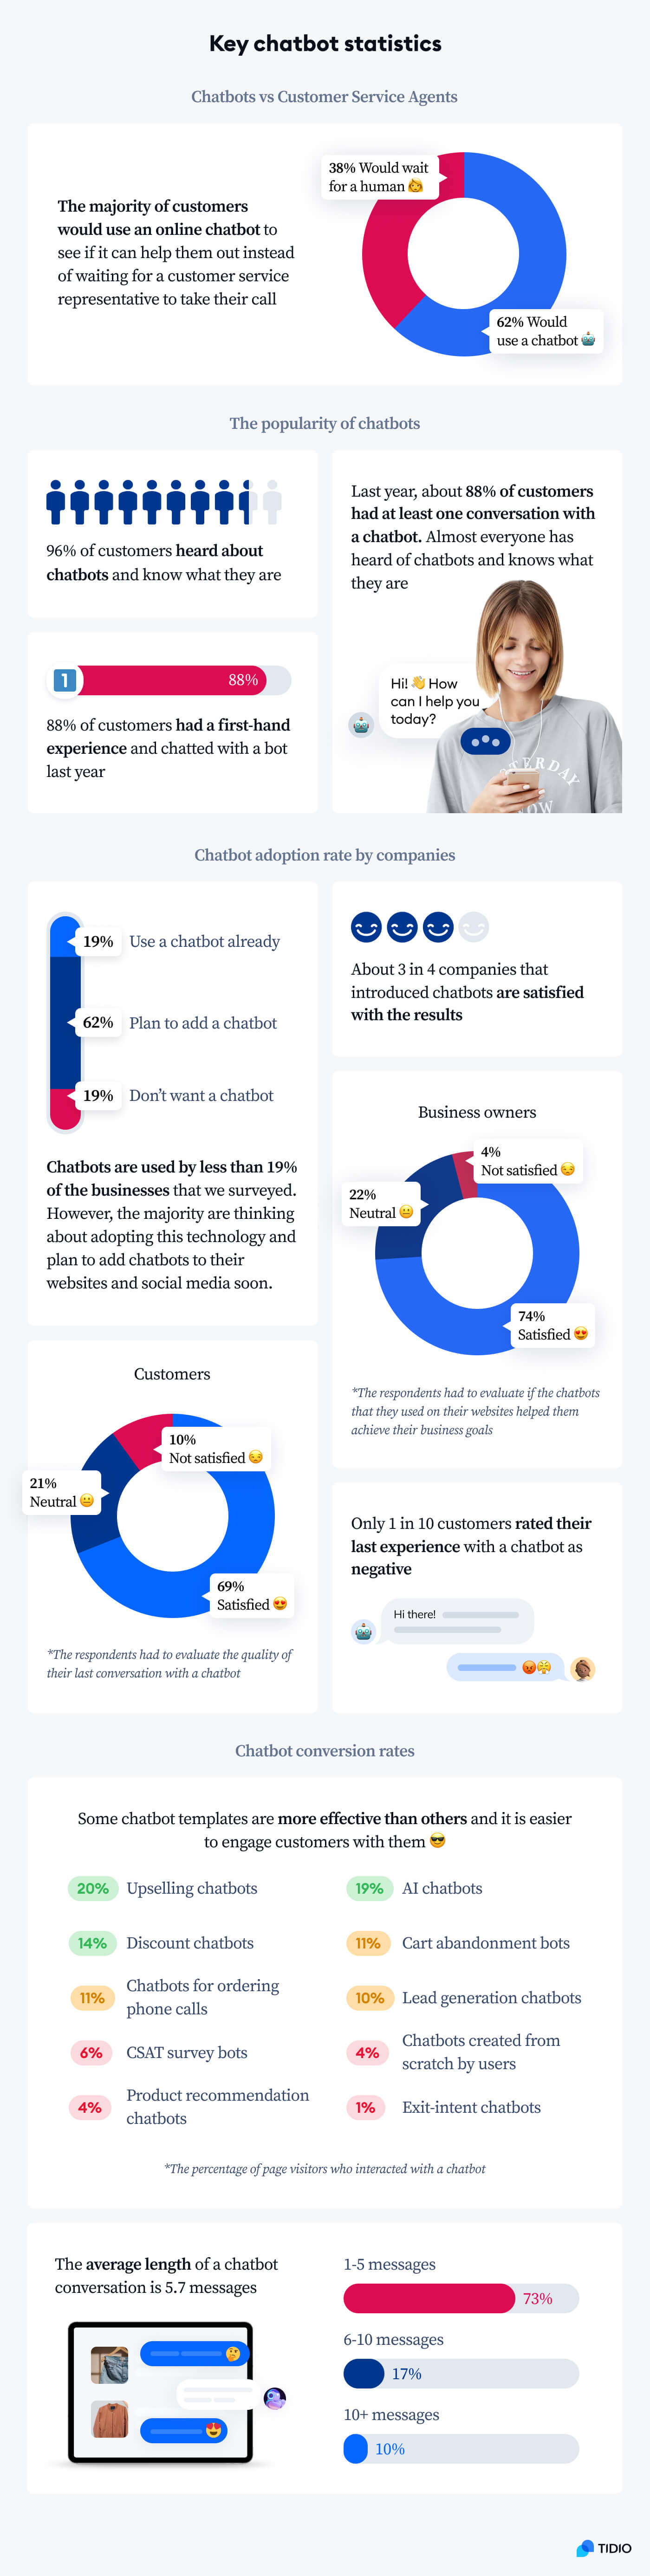 Infographic with key chatbot statistics